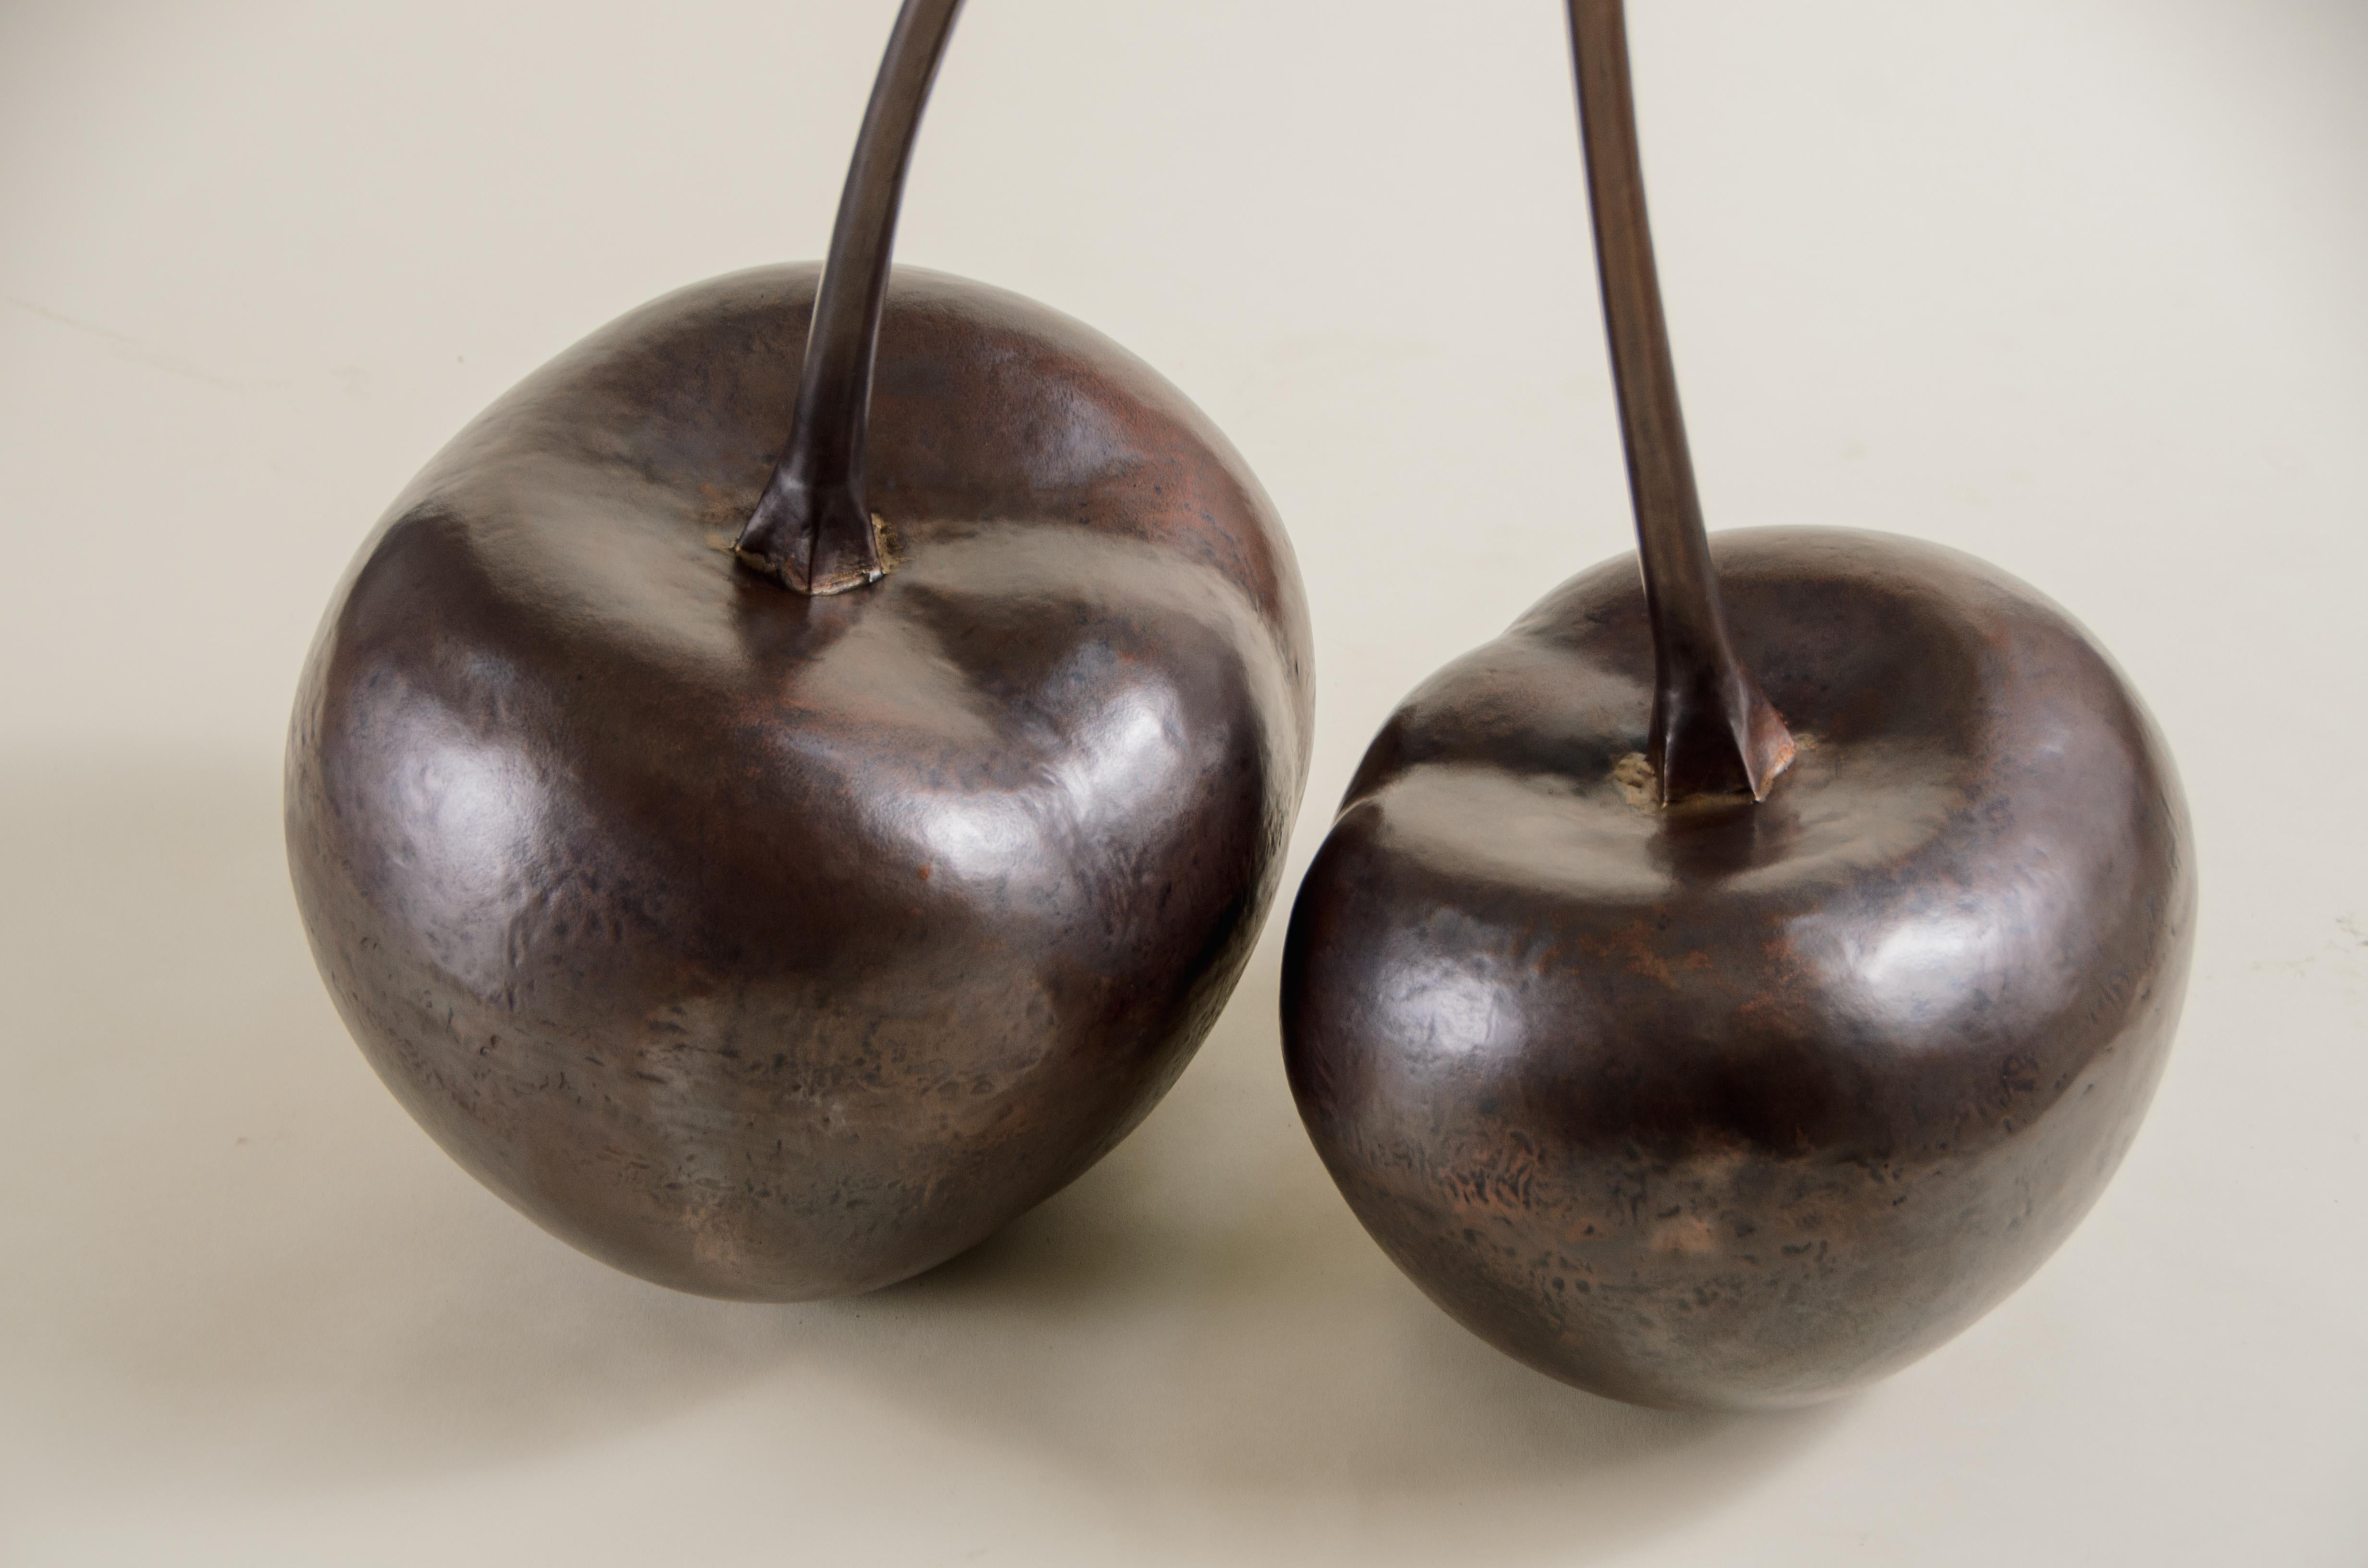 Organic Modern Contemporary Cherries Sculpture in Dark Antique Copper by Robert Kuo For Sale